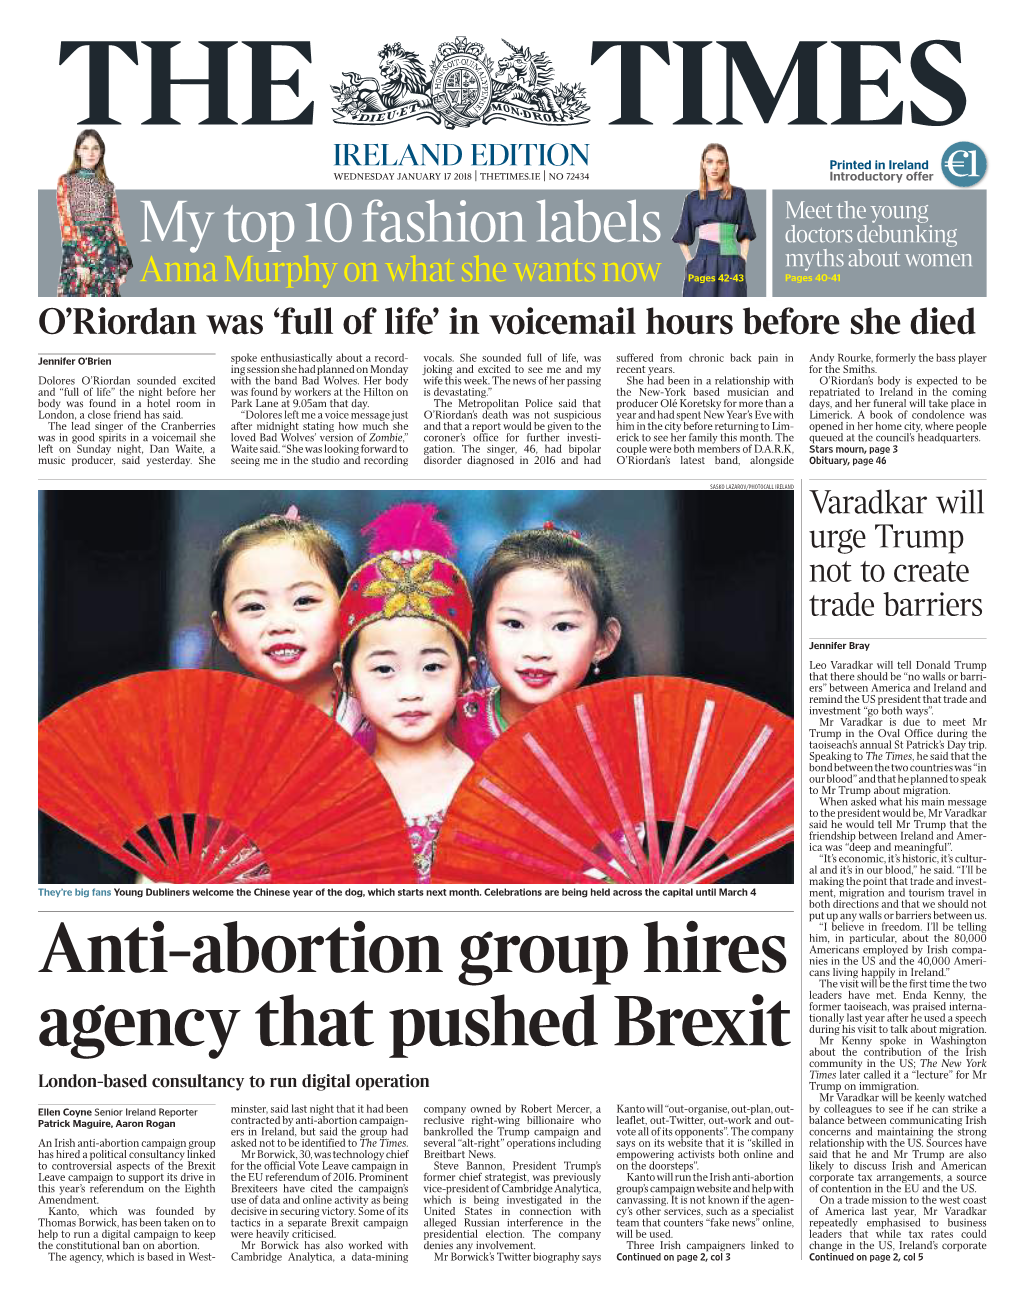 Anti-Abortion Group Hires Agency That Pushed Brexit